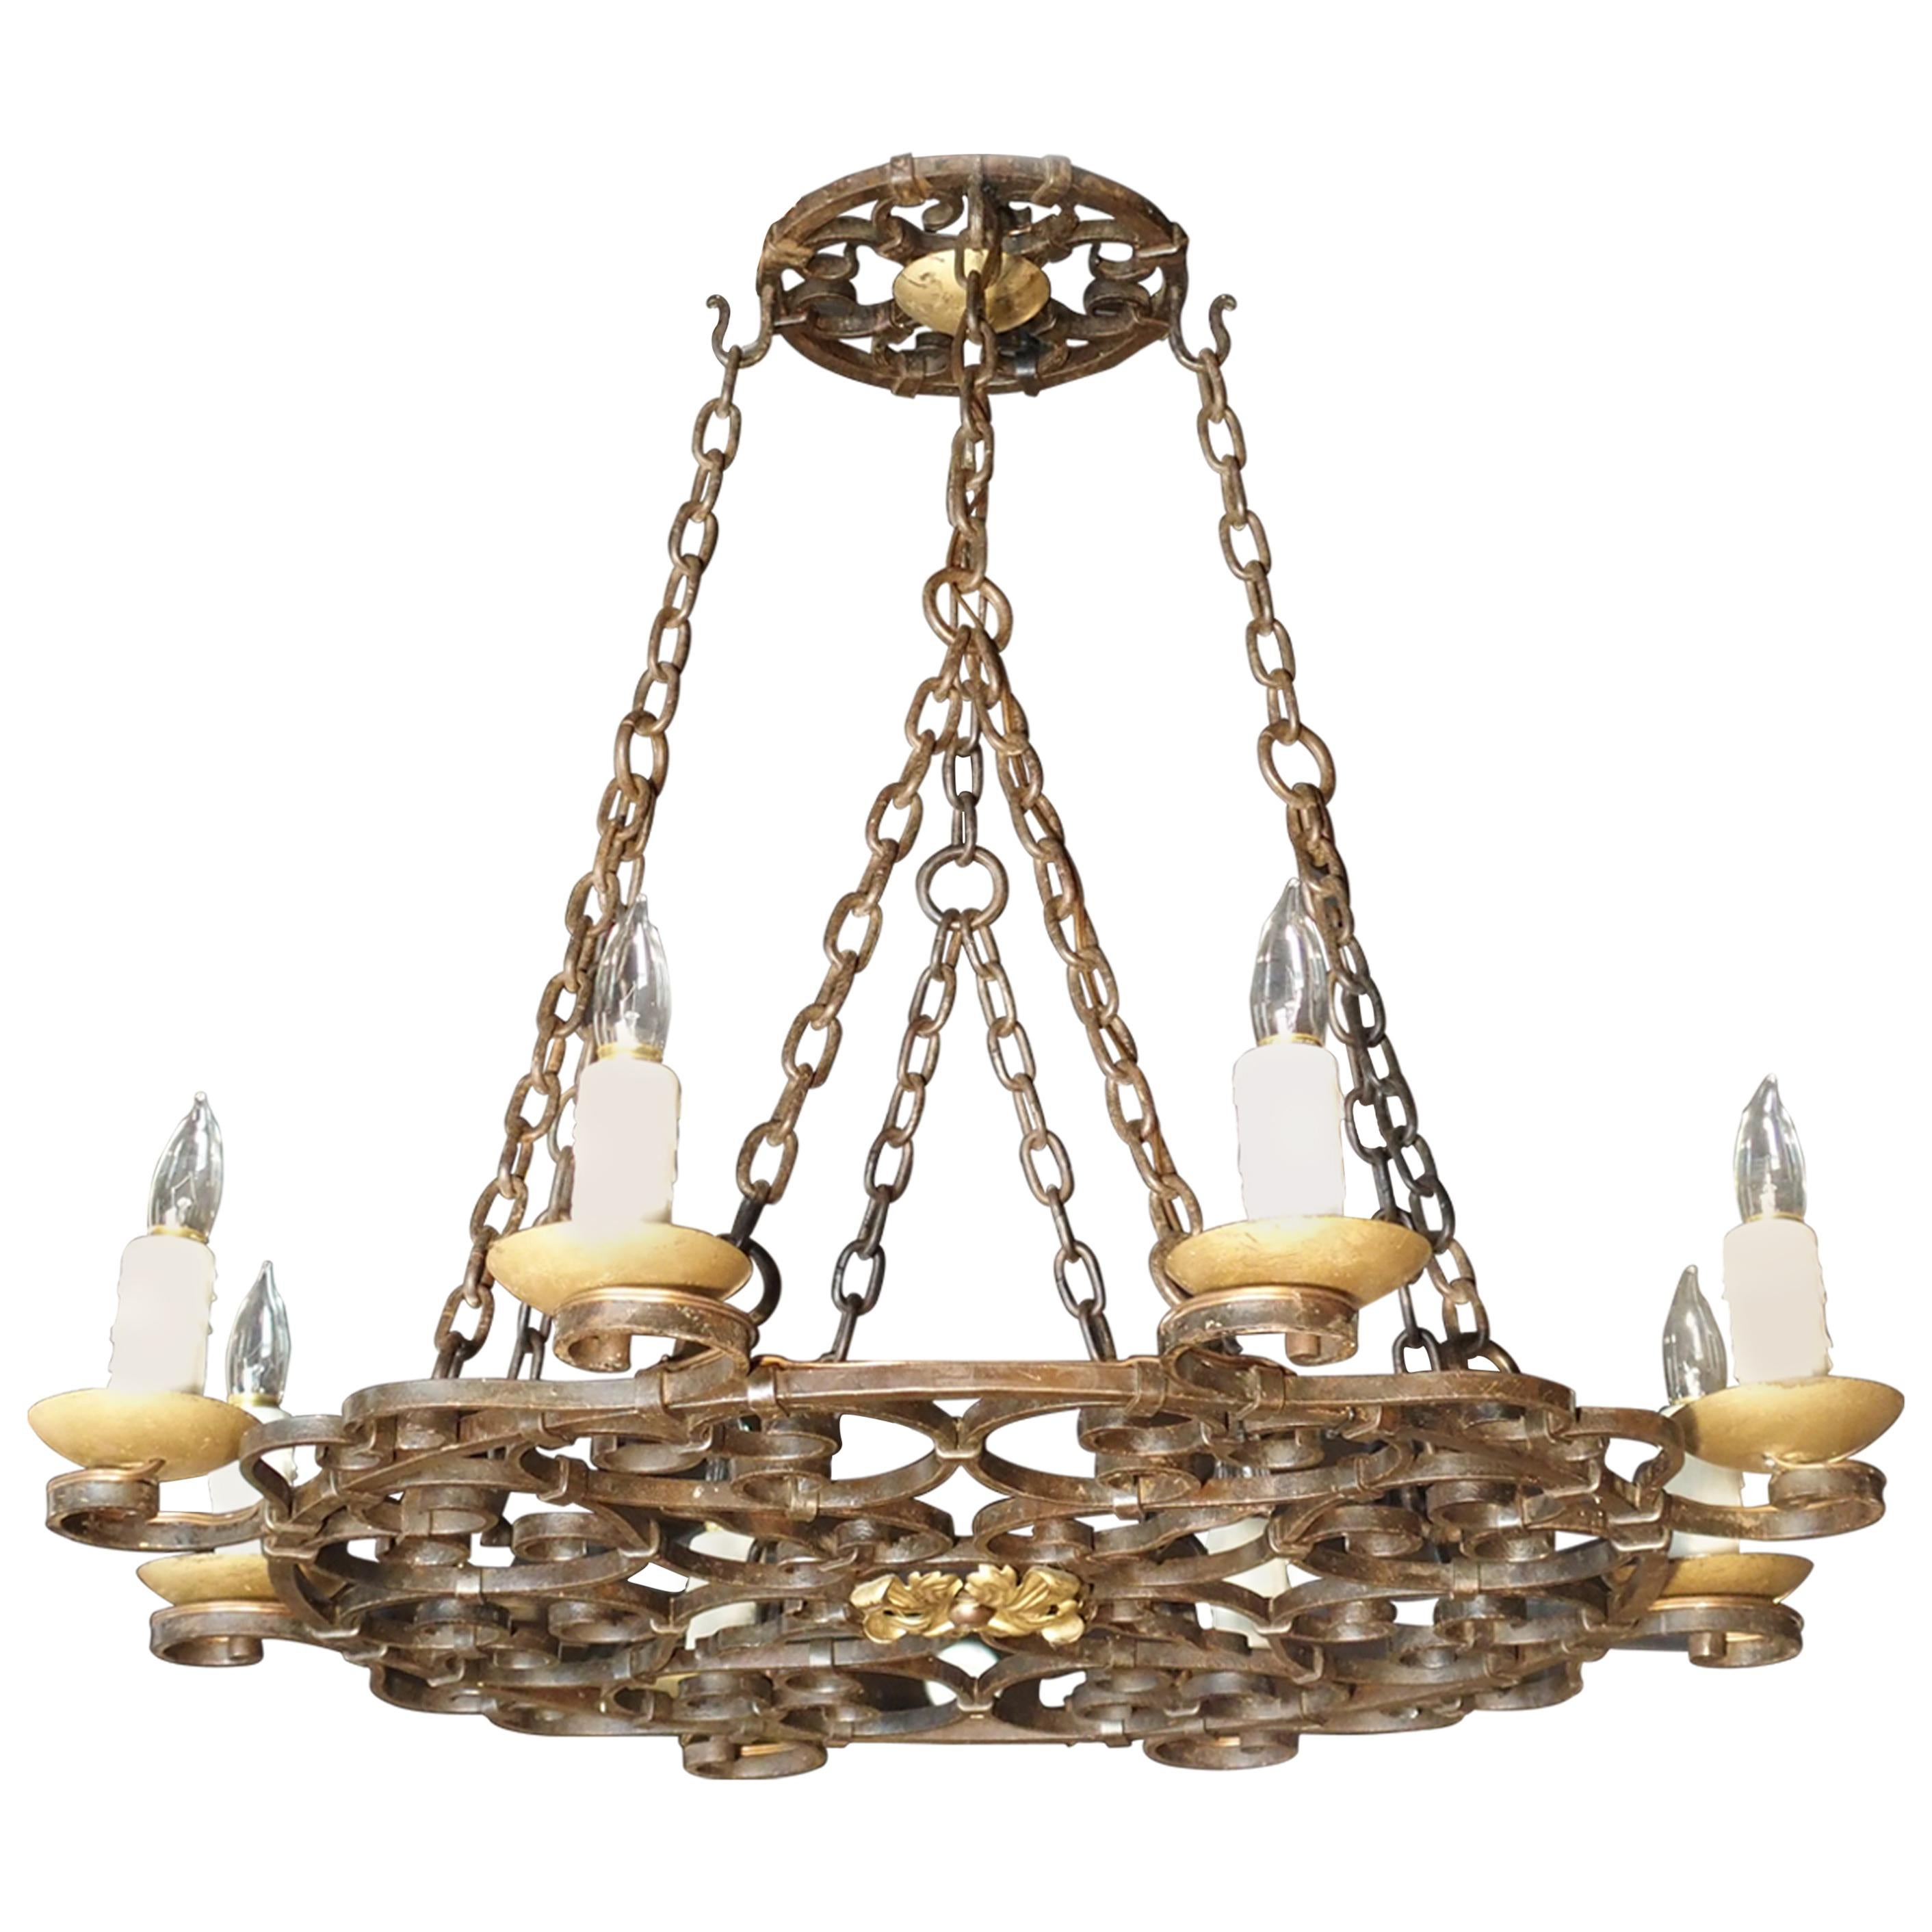 Early 20th Century Eight-Light Iron Chandelier from France